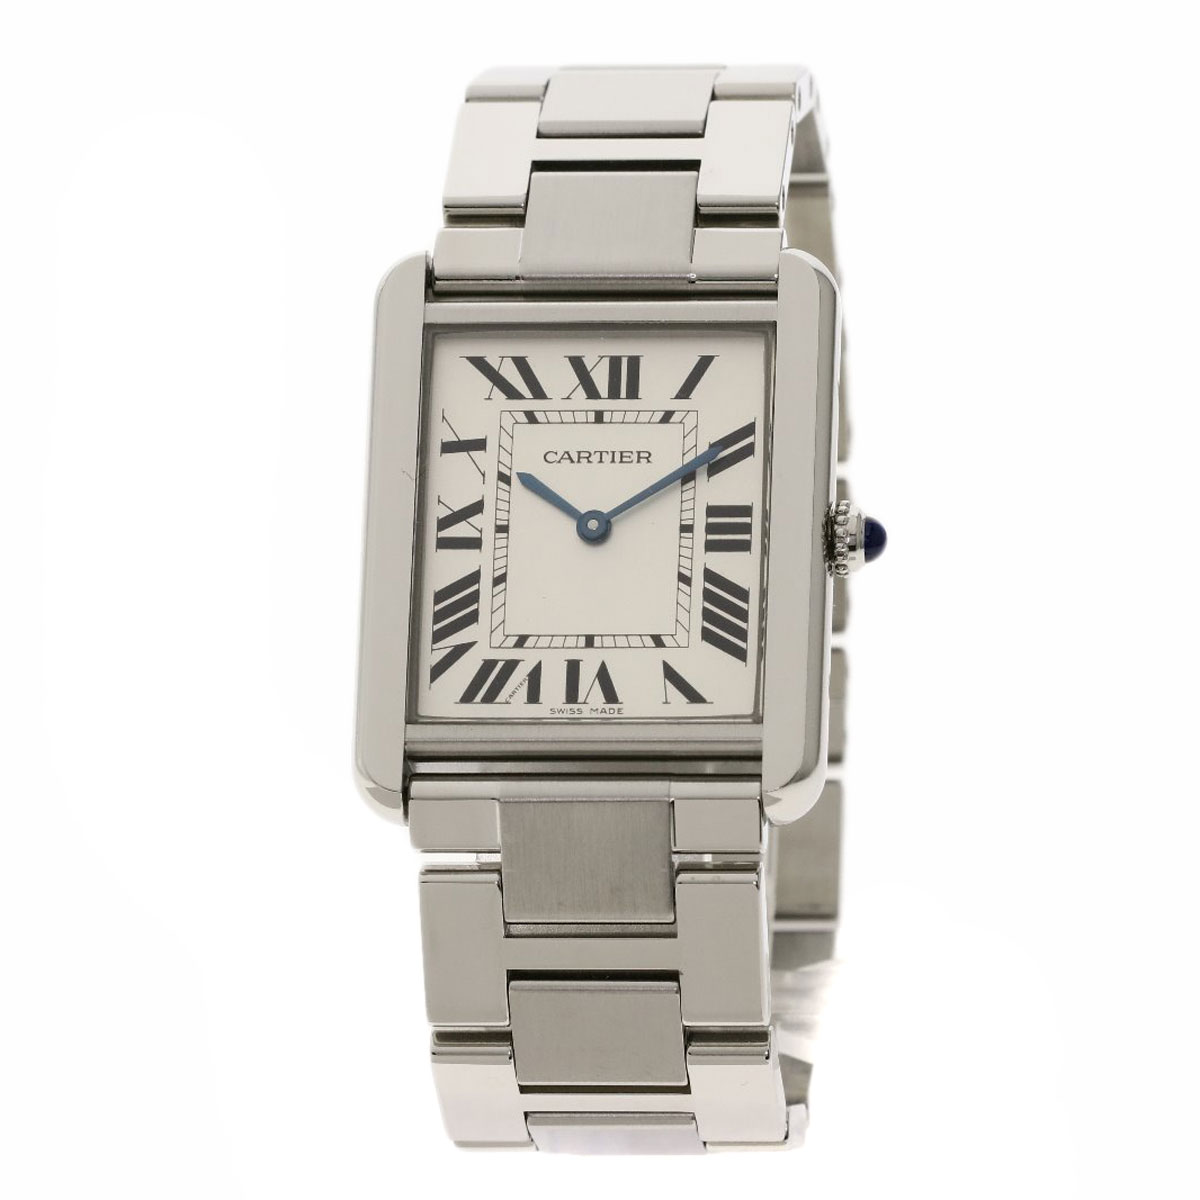 CARTIER Tank solo LM Watches W5200014 Stainless Steel/Stainless Steel ...